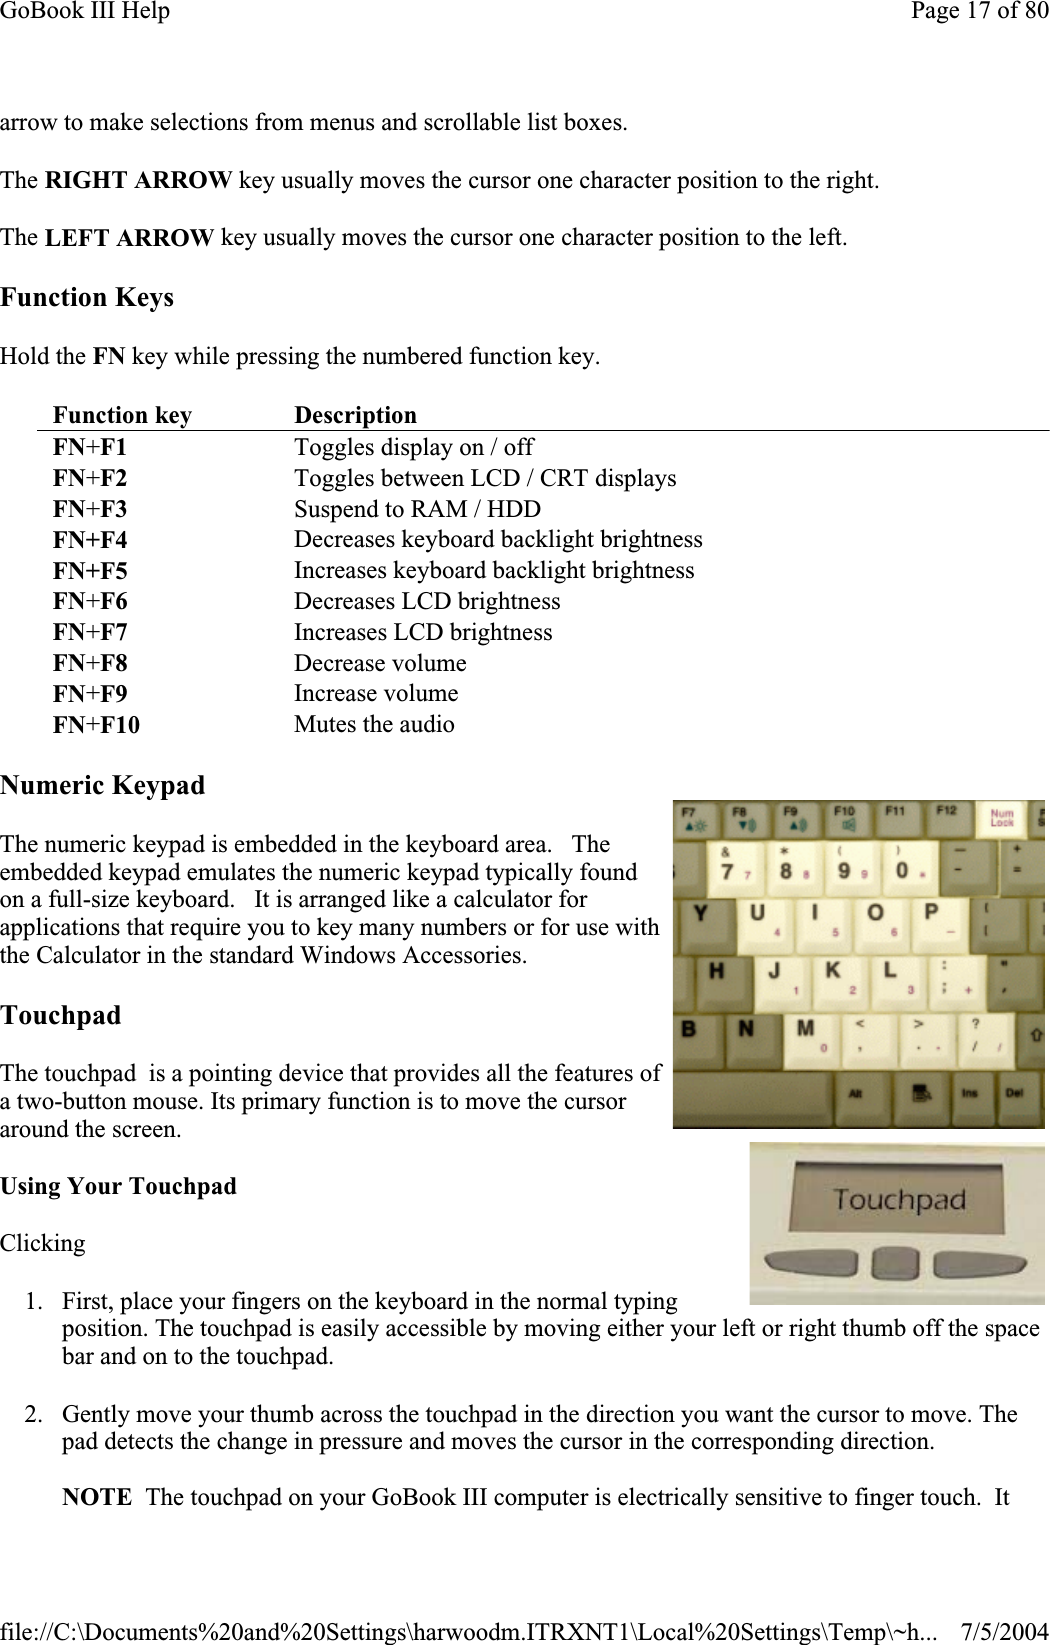 arrow to make selections from menus and scrollable list boxes. The RIGHT ARROW key usually moves the cursor one character position to the right.The LEFT ARROW key usually moves the cursor one character position to the left.Function Keys Hold the FN key while pressing the numbered function key.Numeric Keypad The numeric keypad is embedded in the keyboard area.   The embedded keypad emulates the numeric keypad typically found on a full-size keyboard.   It is arranged like a calculator for applications that require you to key many numbers or for use with the Calculator in the standard Windows Accessories.TouchpadThe touchpad  is a pointing device that provides all the features of a two-button mouse. Its primary function is to move the cursor around the screen. Using Your Touchpad Clicking1. First, place your fingers on the keyboard in the normal typing position. The touchpad is easily accessible by moving either your left or right thumb off the space bar and on to the touchpad. 2. Gently move your thumb across the touchpad in the direction you want the cursor to move. The pad detects the change in pressure and moves the cursor in the corresponding direction.NOTE  The touchpad on your GoBook III computer is electrically sensitive to finger touch.  It Function key DescriptionFN+F1  Toggles display on / off FN+F2   Toggles between LCD / CRT displays  FN+F3   Suspend to RAM / HDD FN+F4  Decreases keyboard backlight brightness FN+F5  Increases keyboard backlight brightness FN+F6   Decreases LCD brightness FN+F7 Increases LCD brightness FN+F8 Decrease volume  FN+F9 Increase volume FN+F10  Mutes the audio Page 17 of 80GoBook III Help7/5/2004file://C:\Documents%20and%20Settings\harwoodm.ITRXNT1\Local%20Settings\Temp\~h...